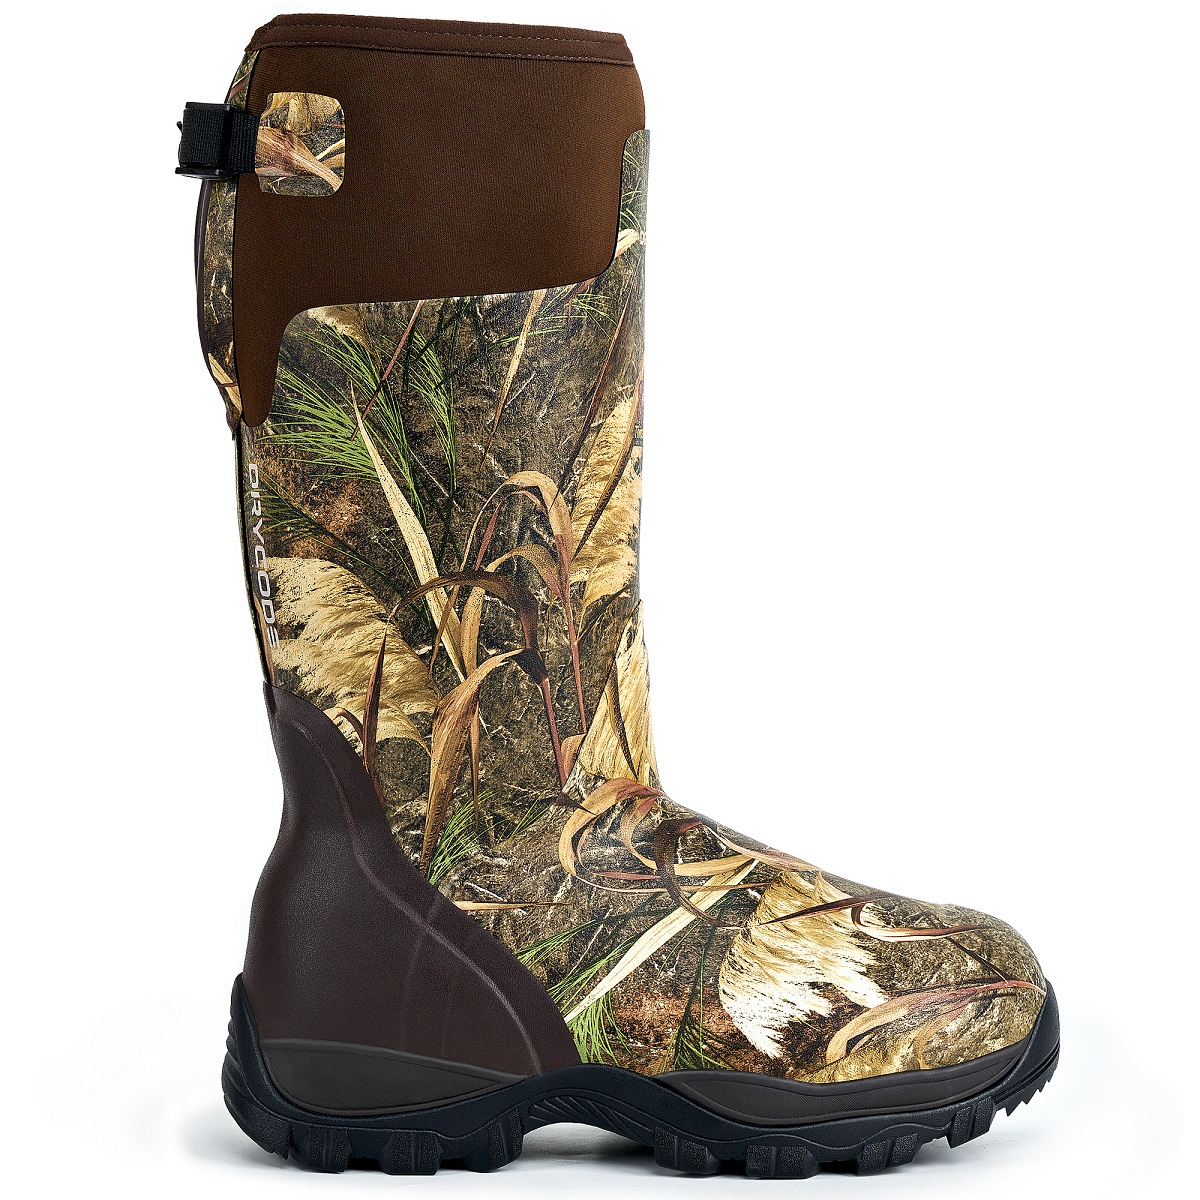 DRYCODE Camo Hunting Boots (Reed Grass) for Men&Women, Warm Hunting Hiking Boots